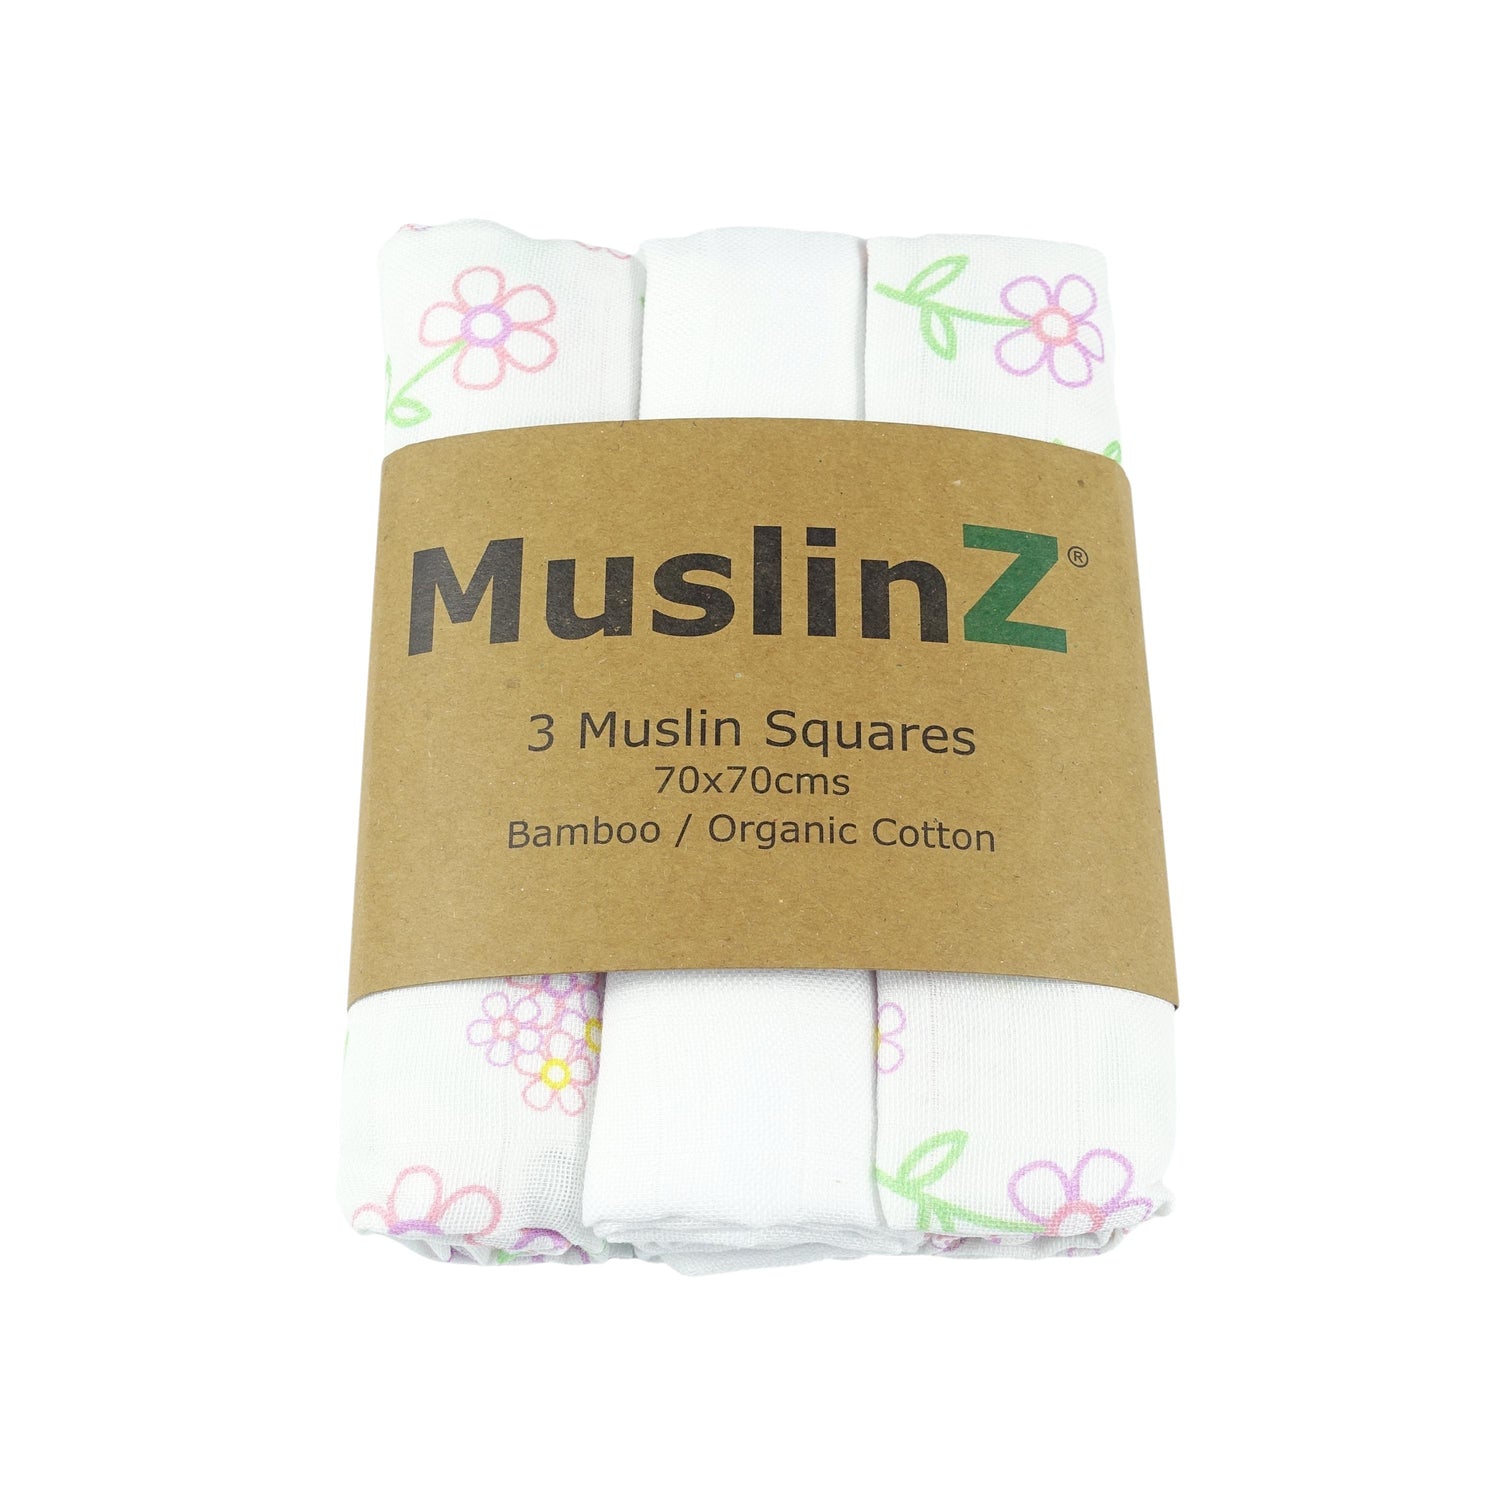 Packet of 3 muslin square cloths for baby in a pattern of flowers, made from bamboo and cotton.